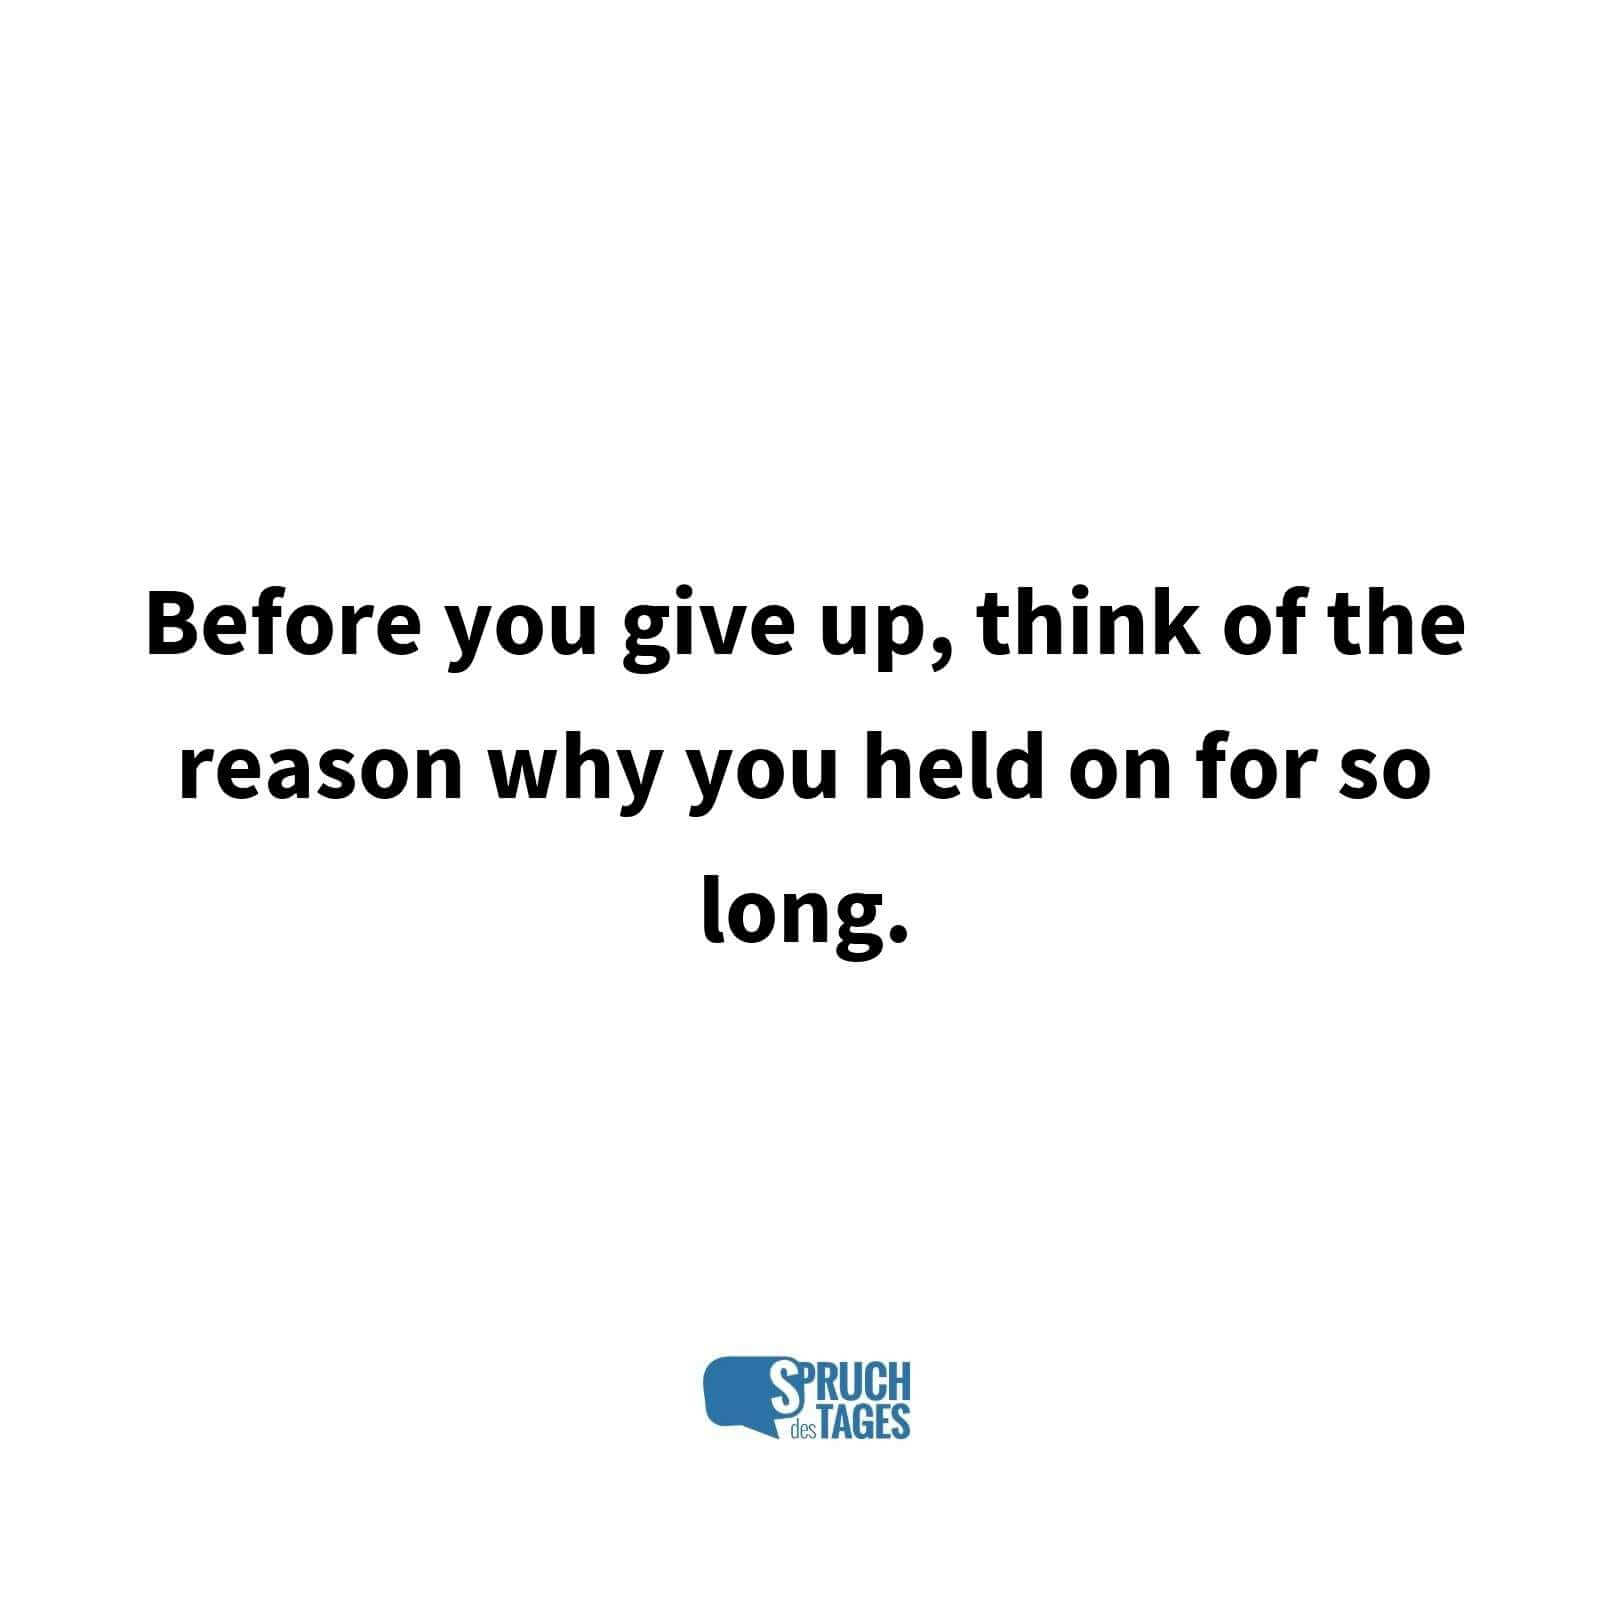 Before you give up, think of the reason why you held on for so long.